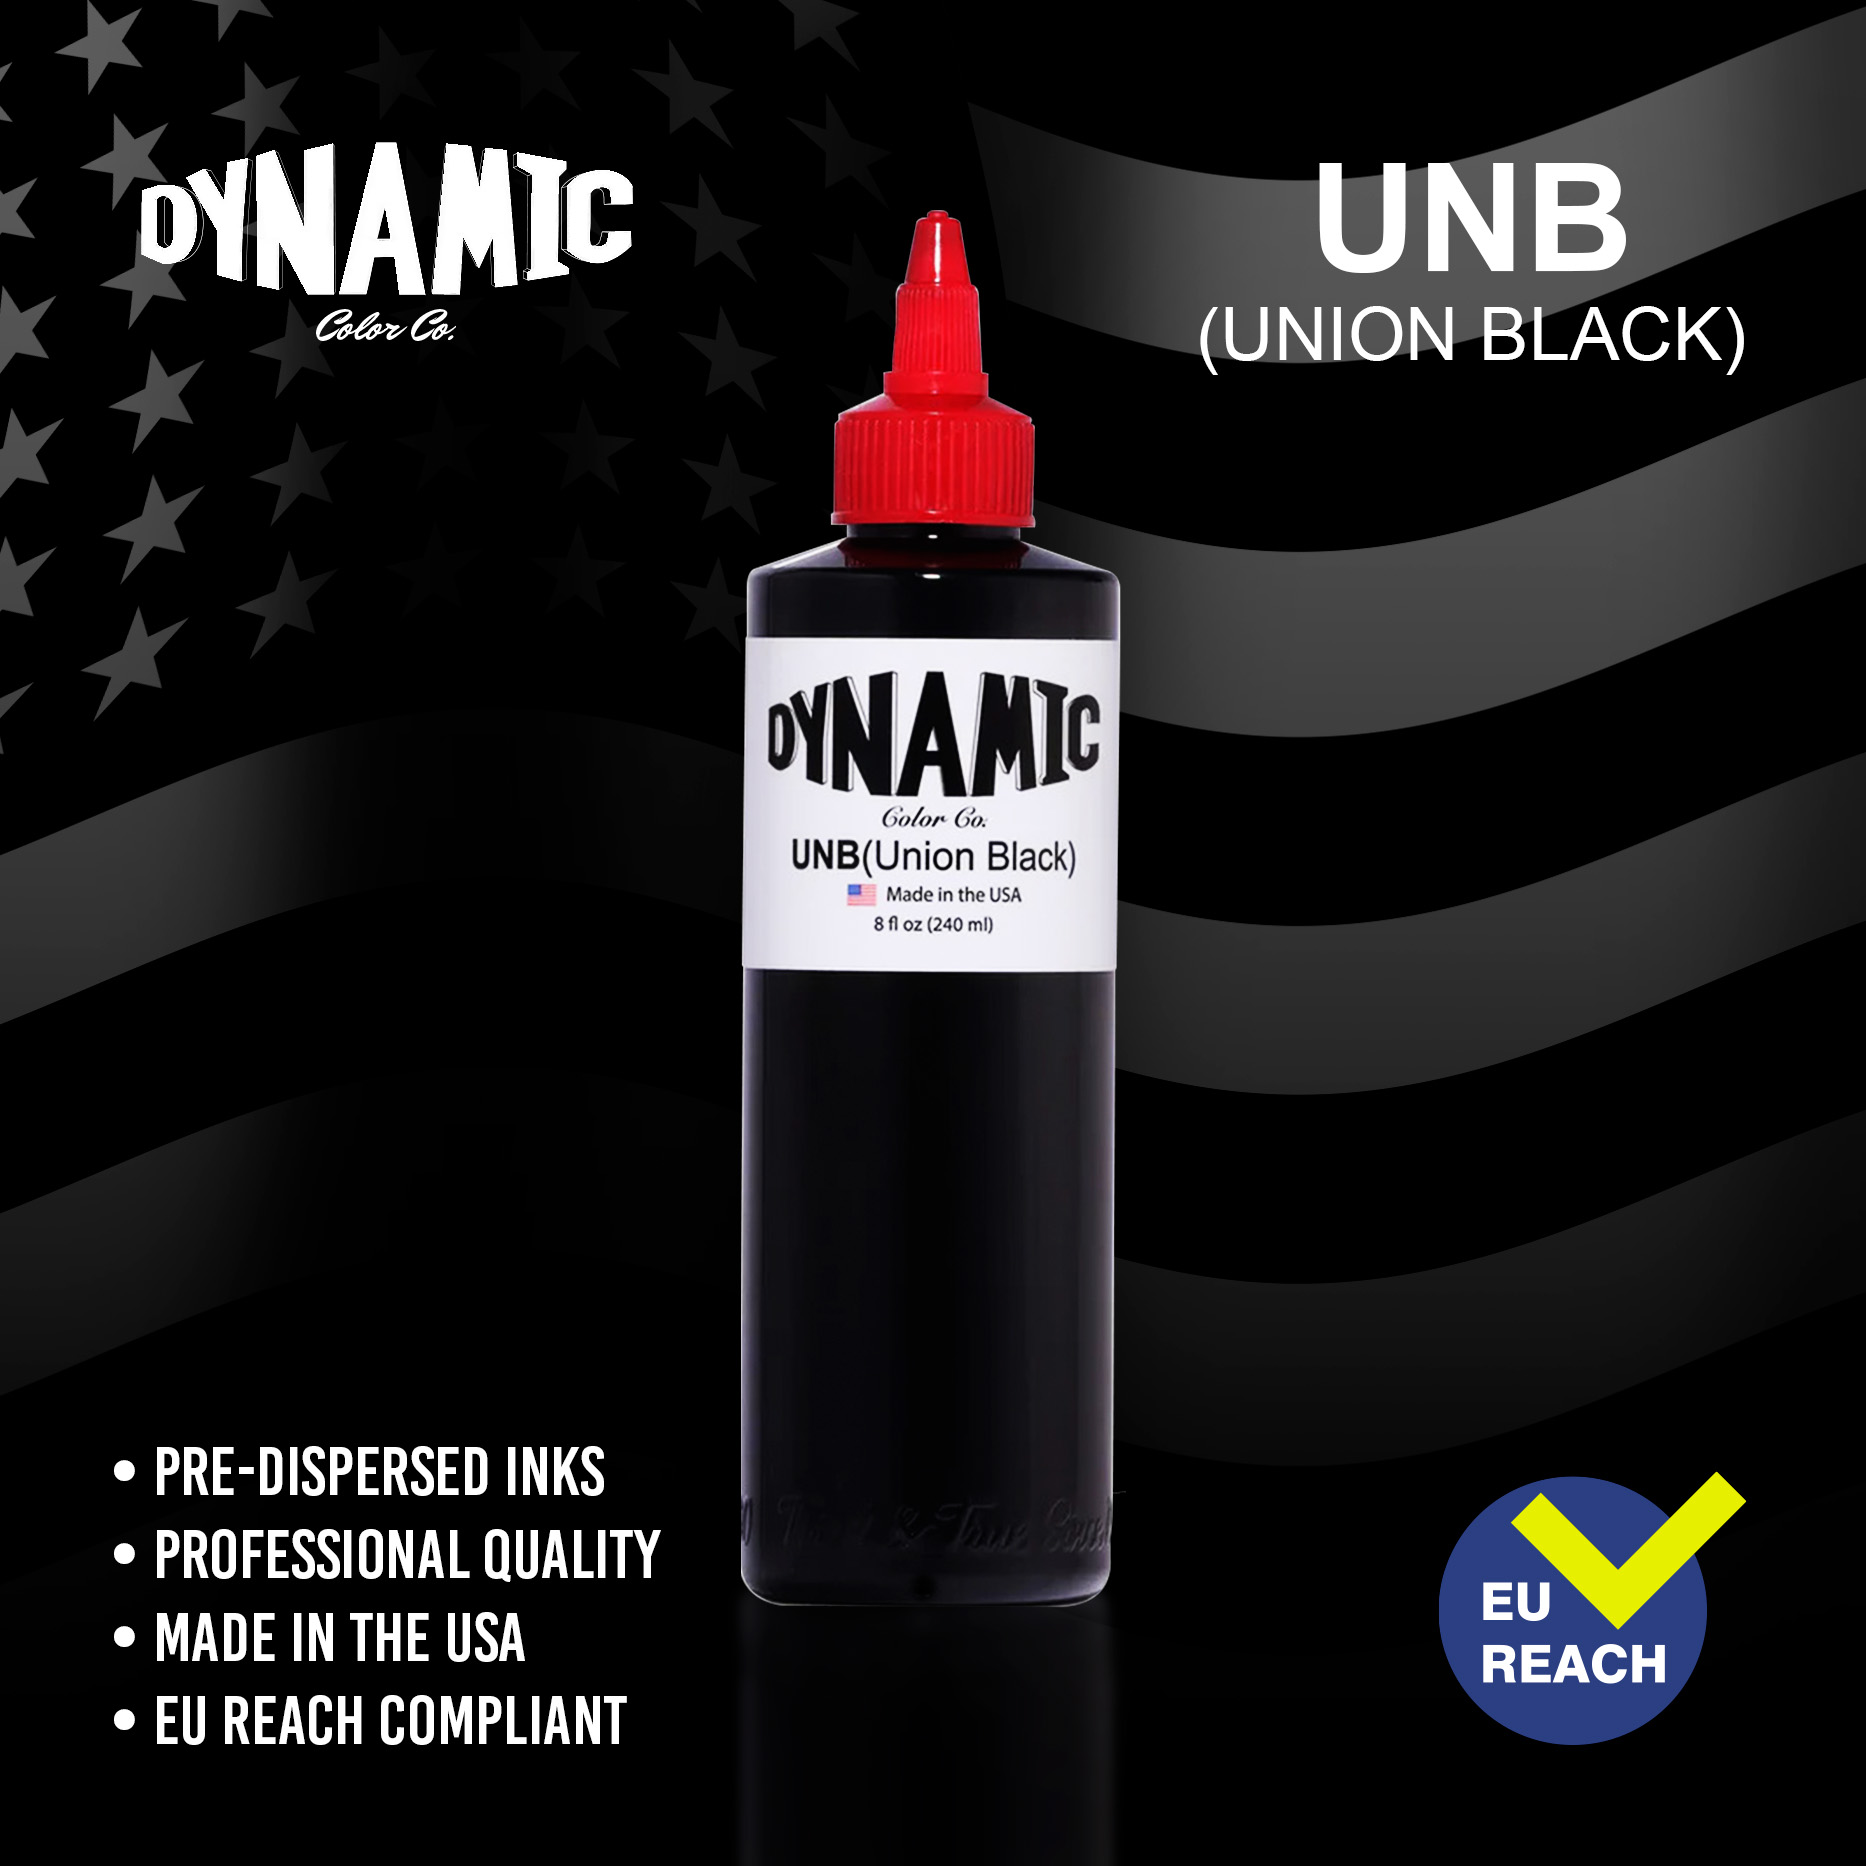 Dynamic Ink Union Black UNB - High-quality, deep black vegan tattoo ink for rich, long-lasting results. Perfect for outlines and shading.